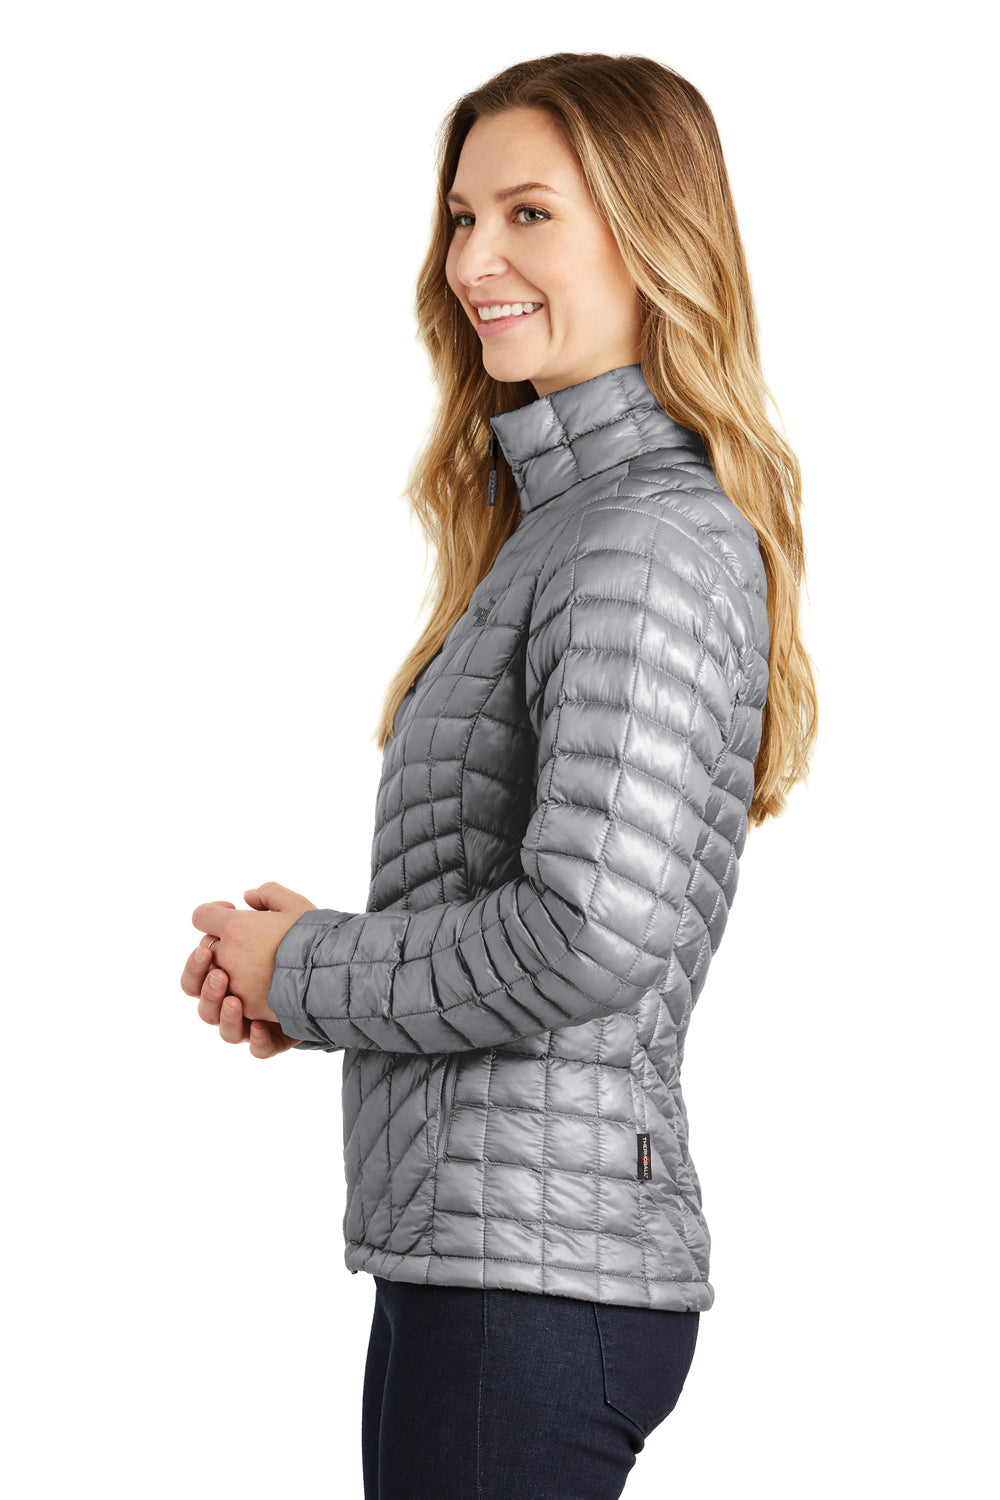 The North Face NF0A3LHK Womens ThermoBall Trekker Water Resistant Full Zip Jacket Mid Grey Side